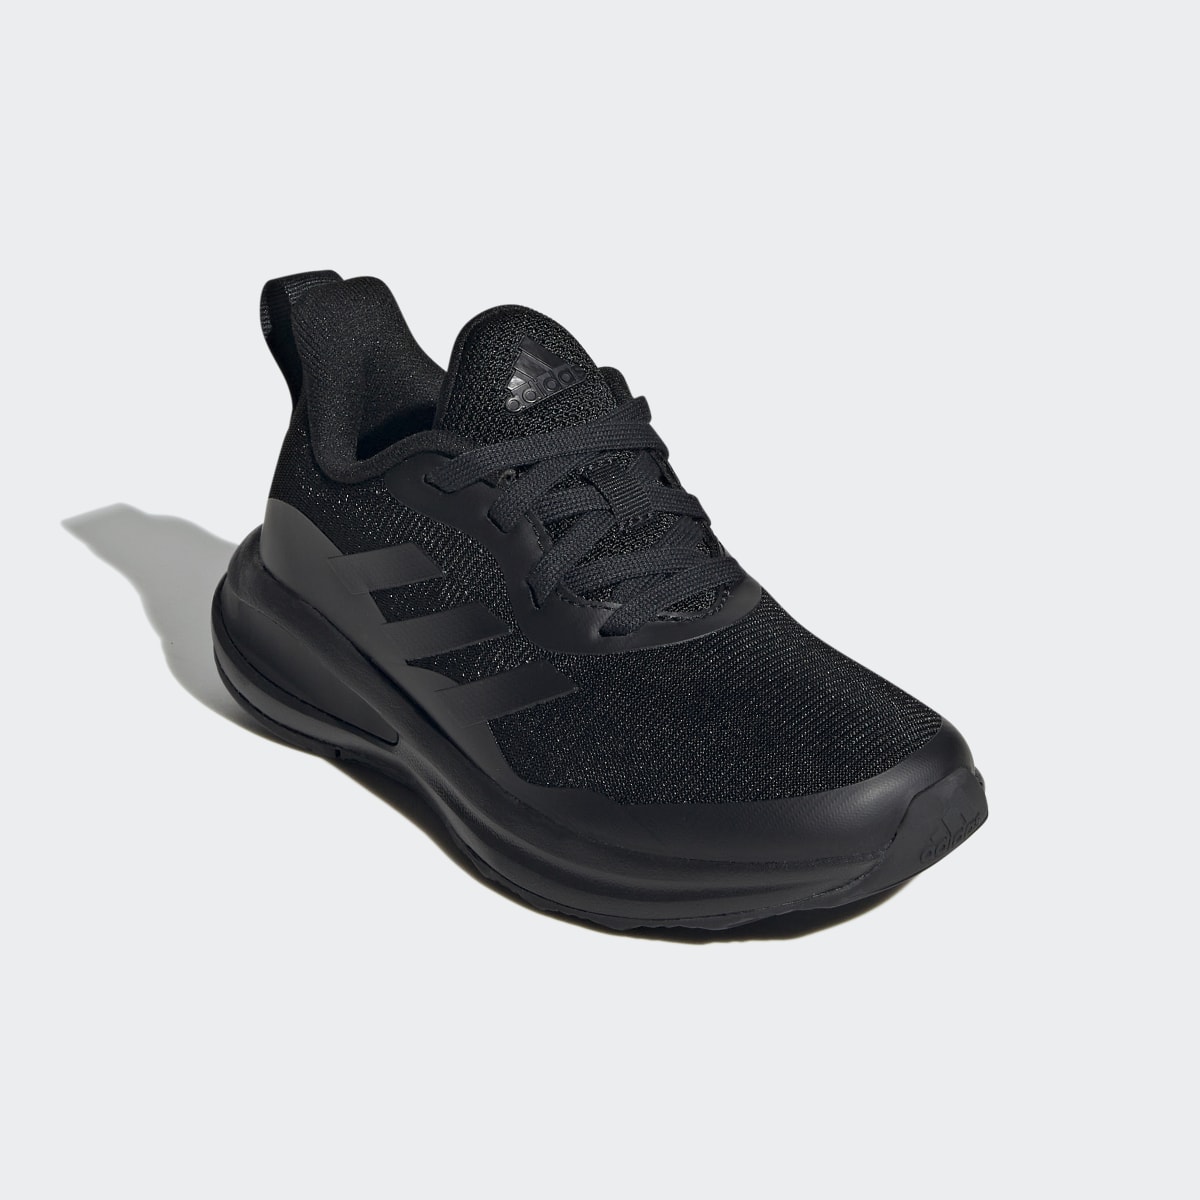 Adidas FortaRun Sport Running Lace Shoes. 5